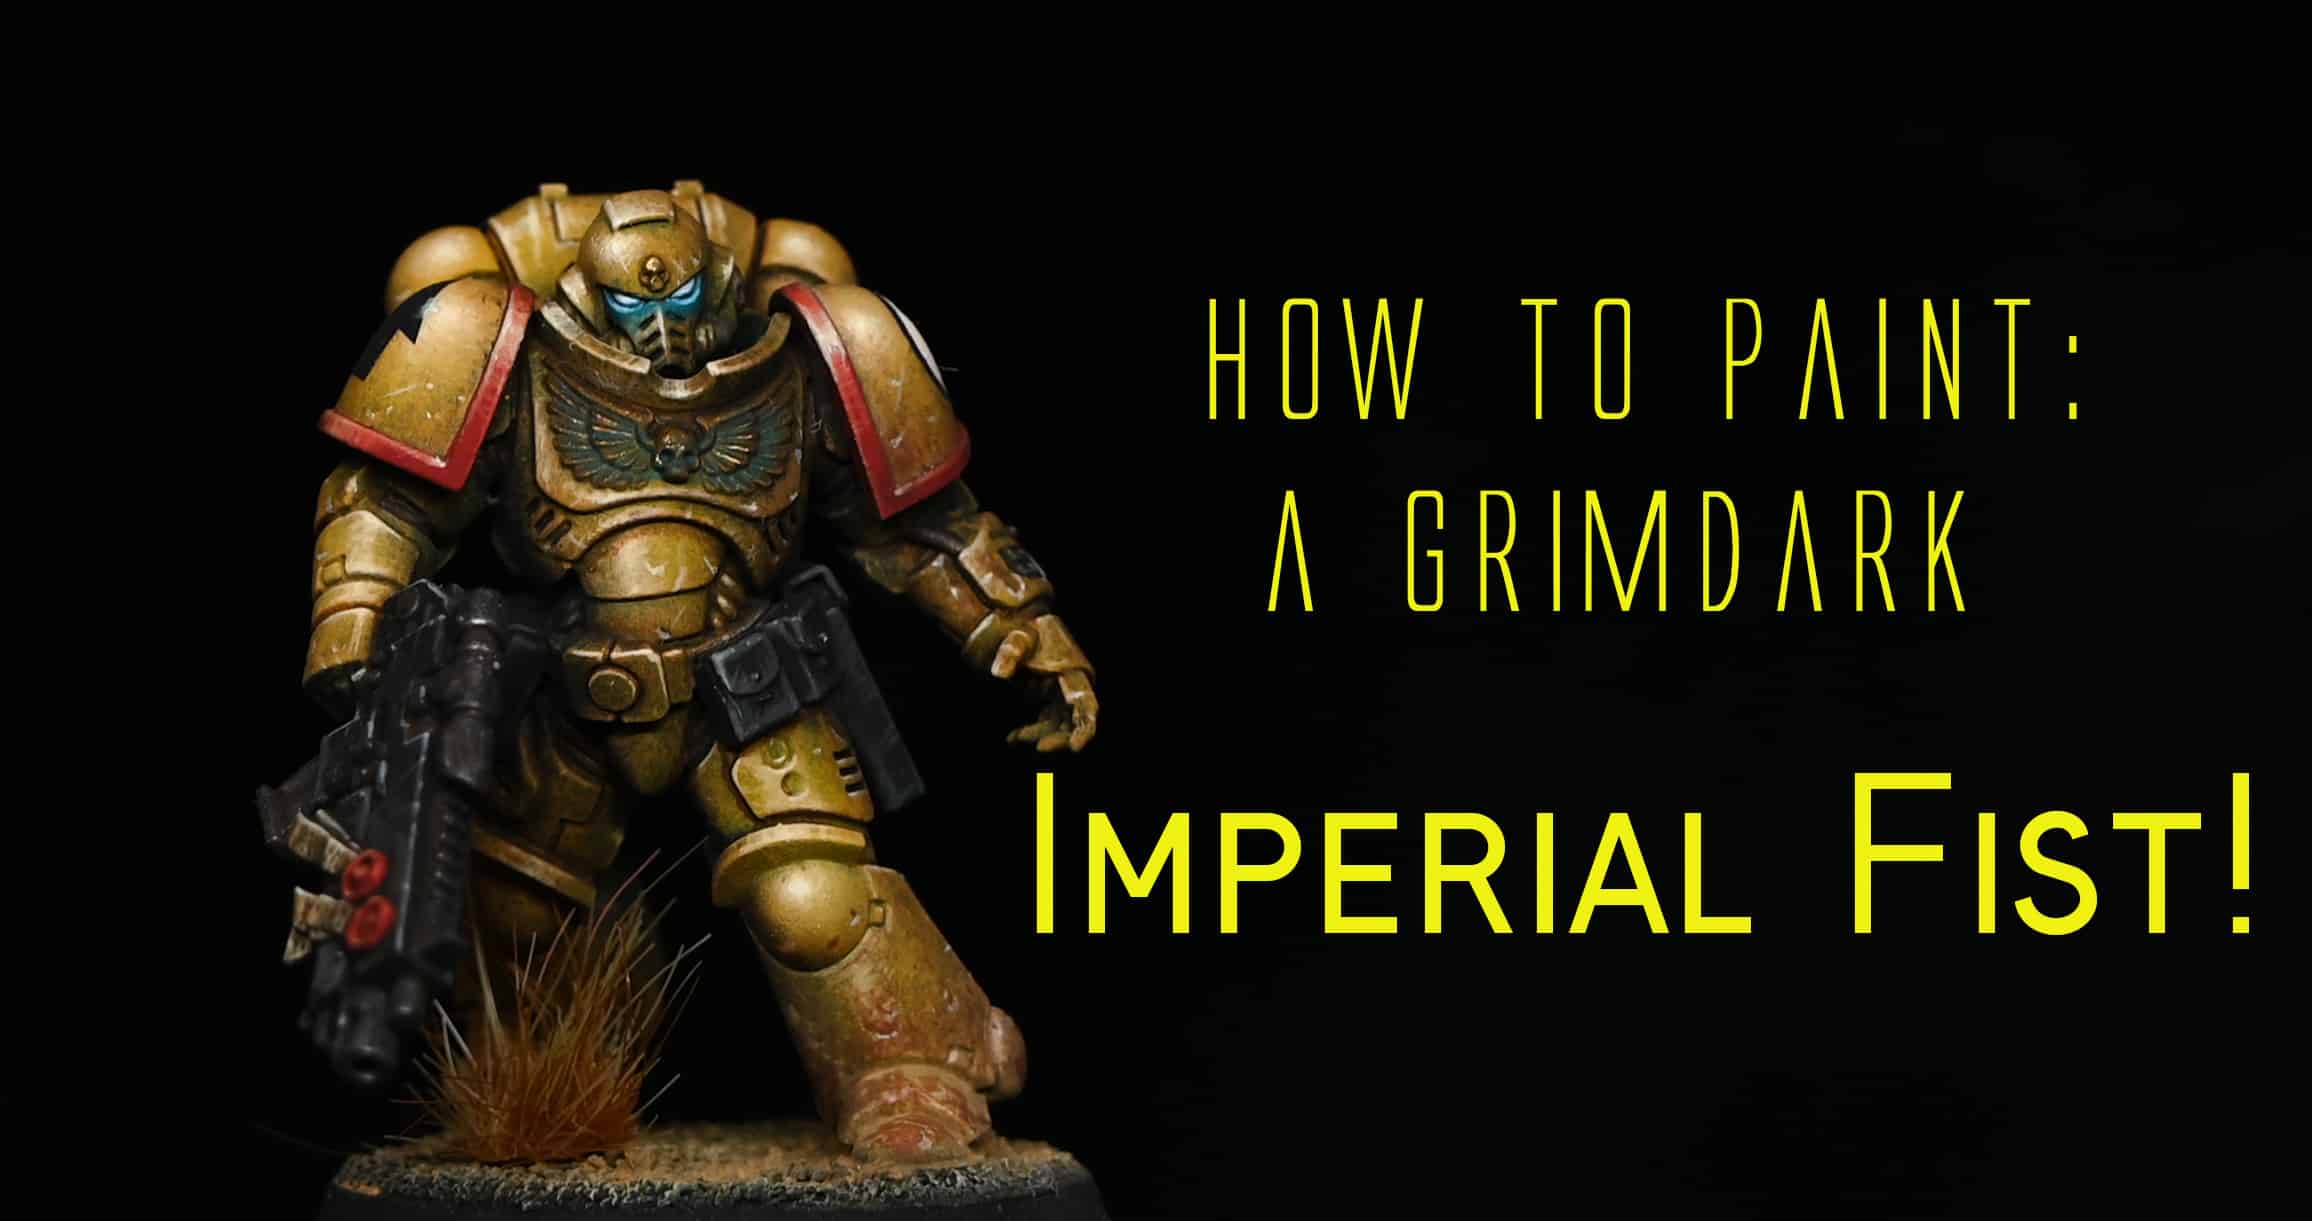 How to Paint a Grimdark Imperial Fist